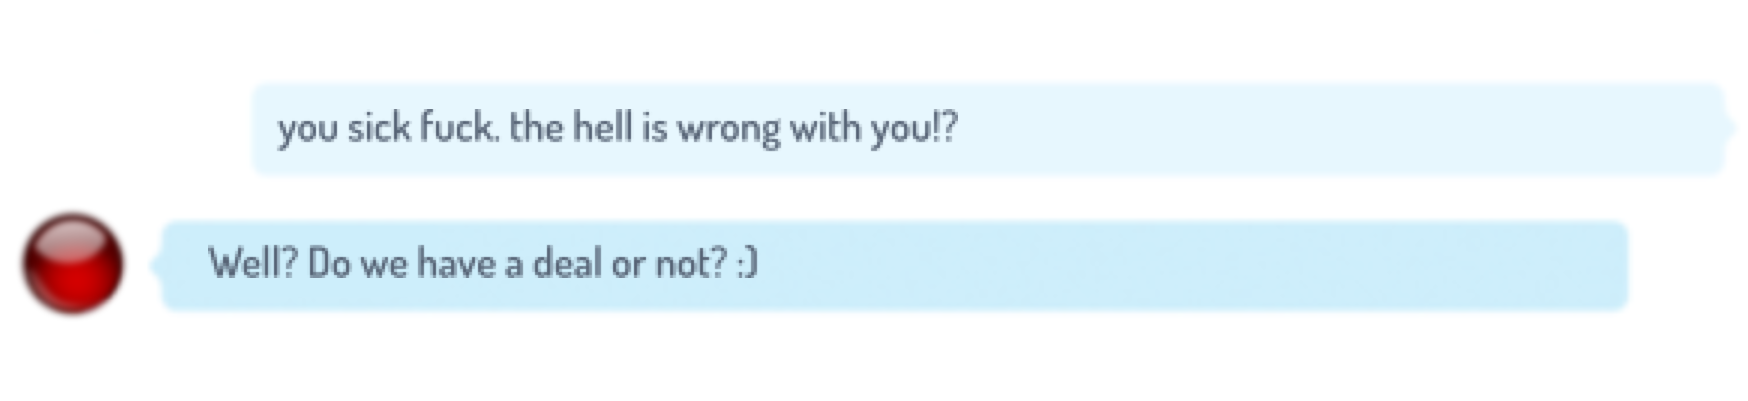 a screenshot of a skype conversation. the main account says 'you sick fuck. the hell is wrong with you!' and the reply says 'Well? Do we have a deal or not?' with a smiling emoticon